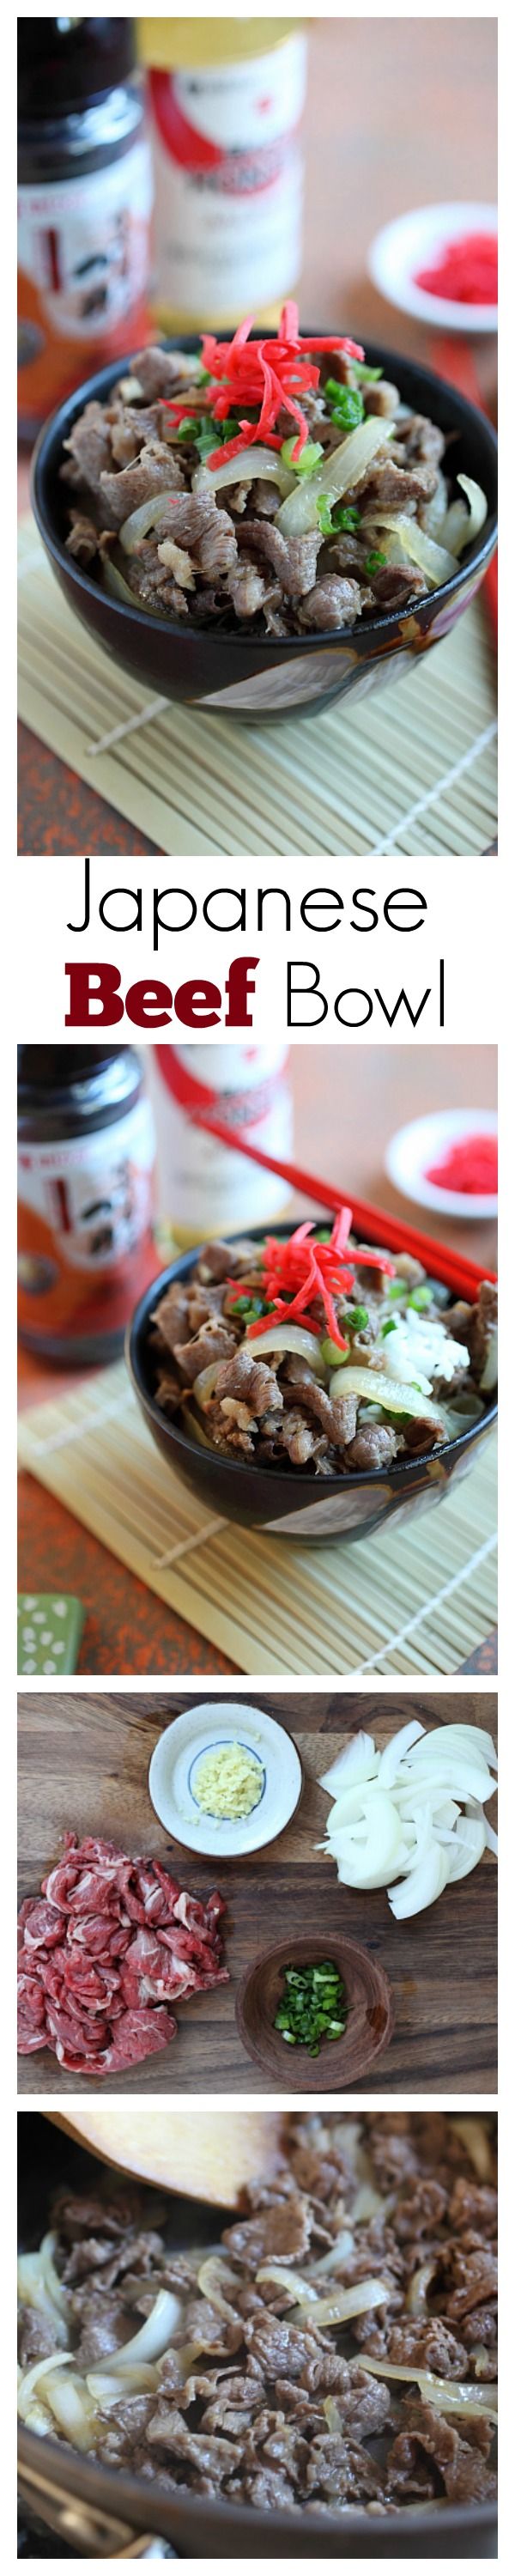 Japanese Beef Bowl Gyudon - easy & delicious simmered beef with onion, soy sauce and rice. Takes 15 minutes to make | rasamalaysia.com